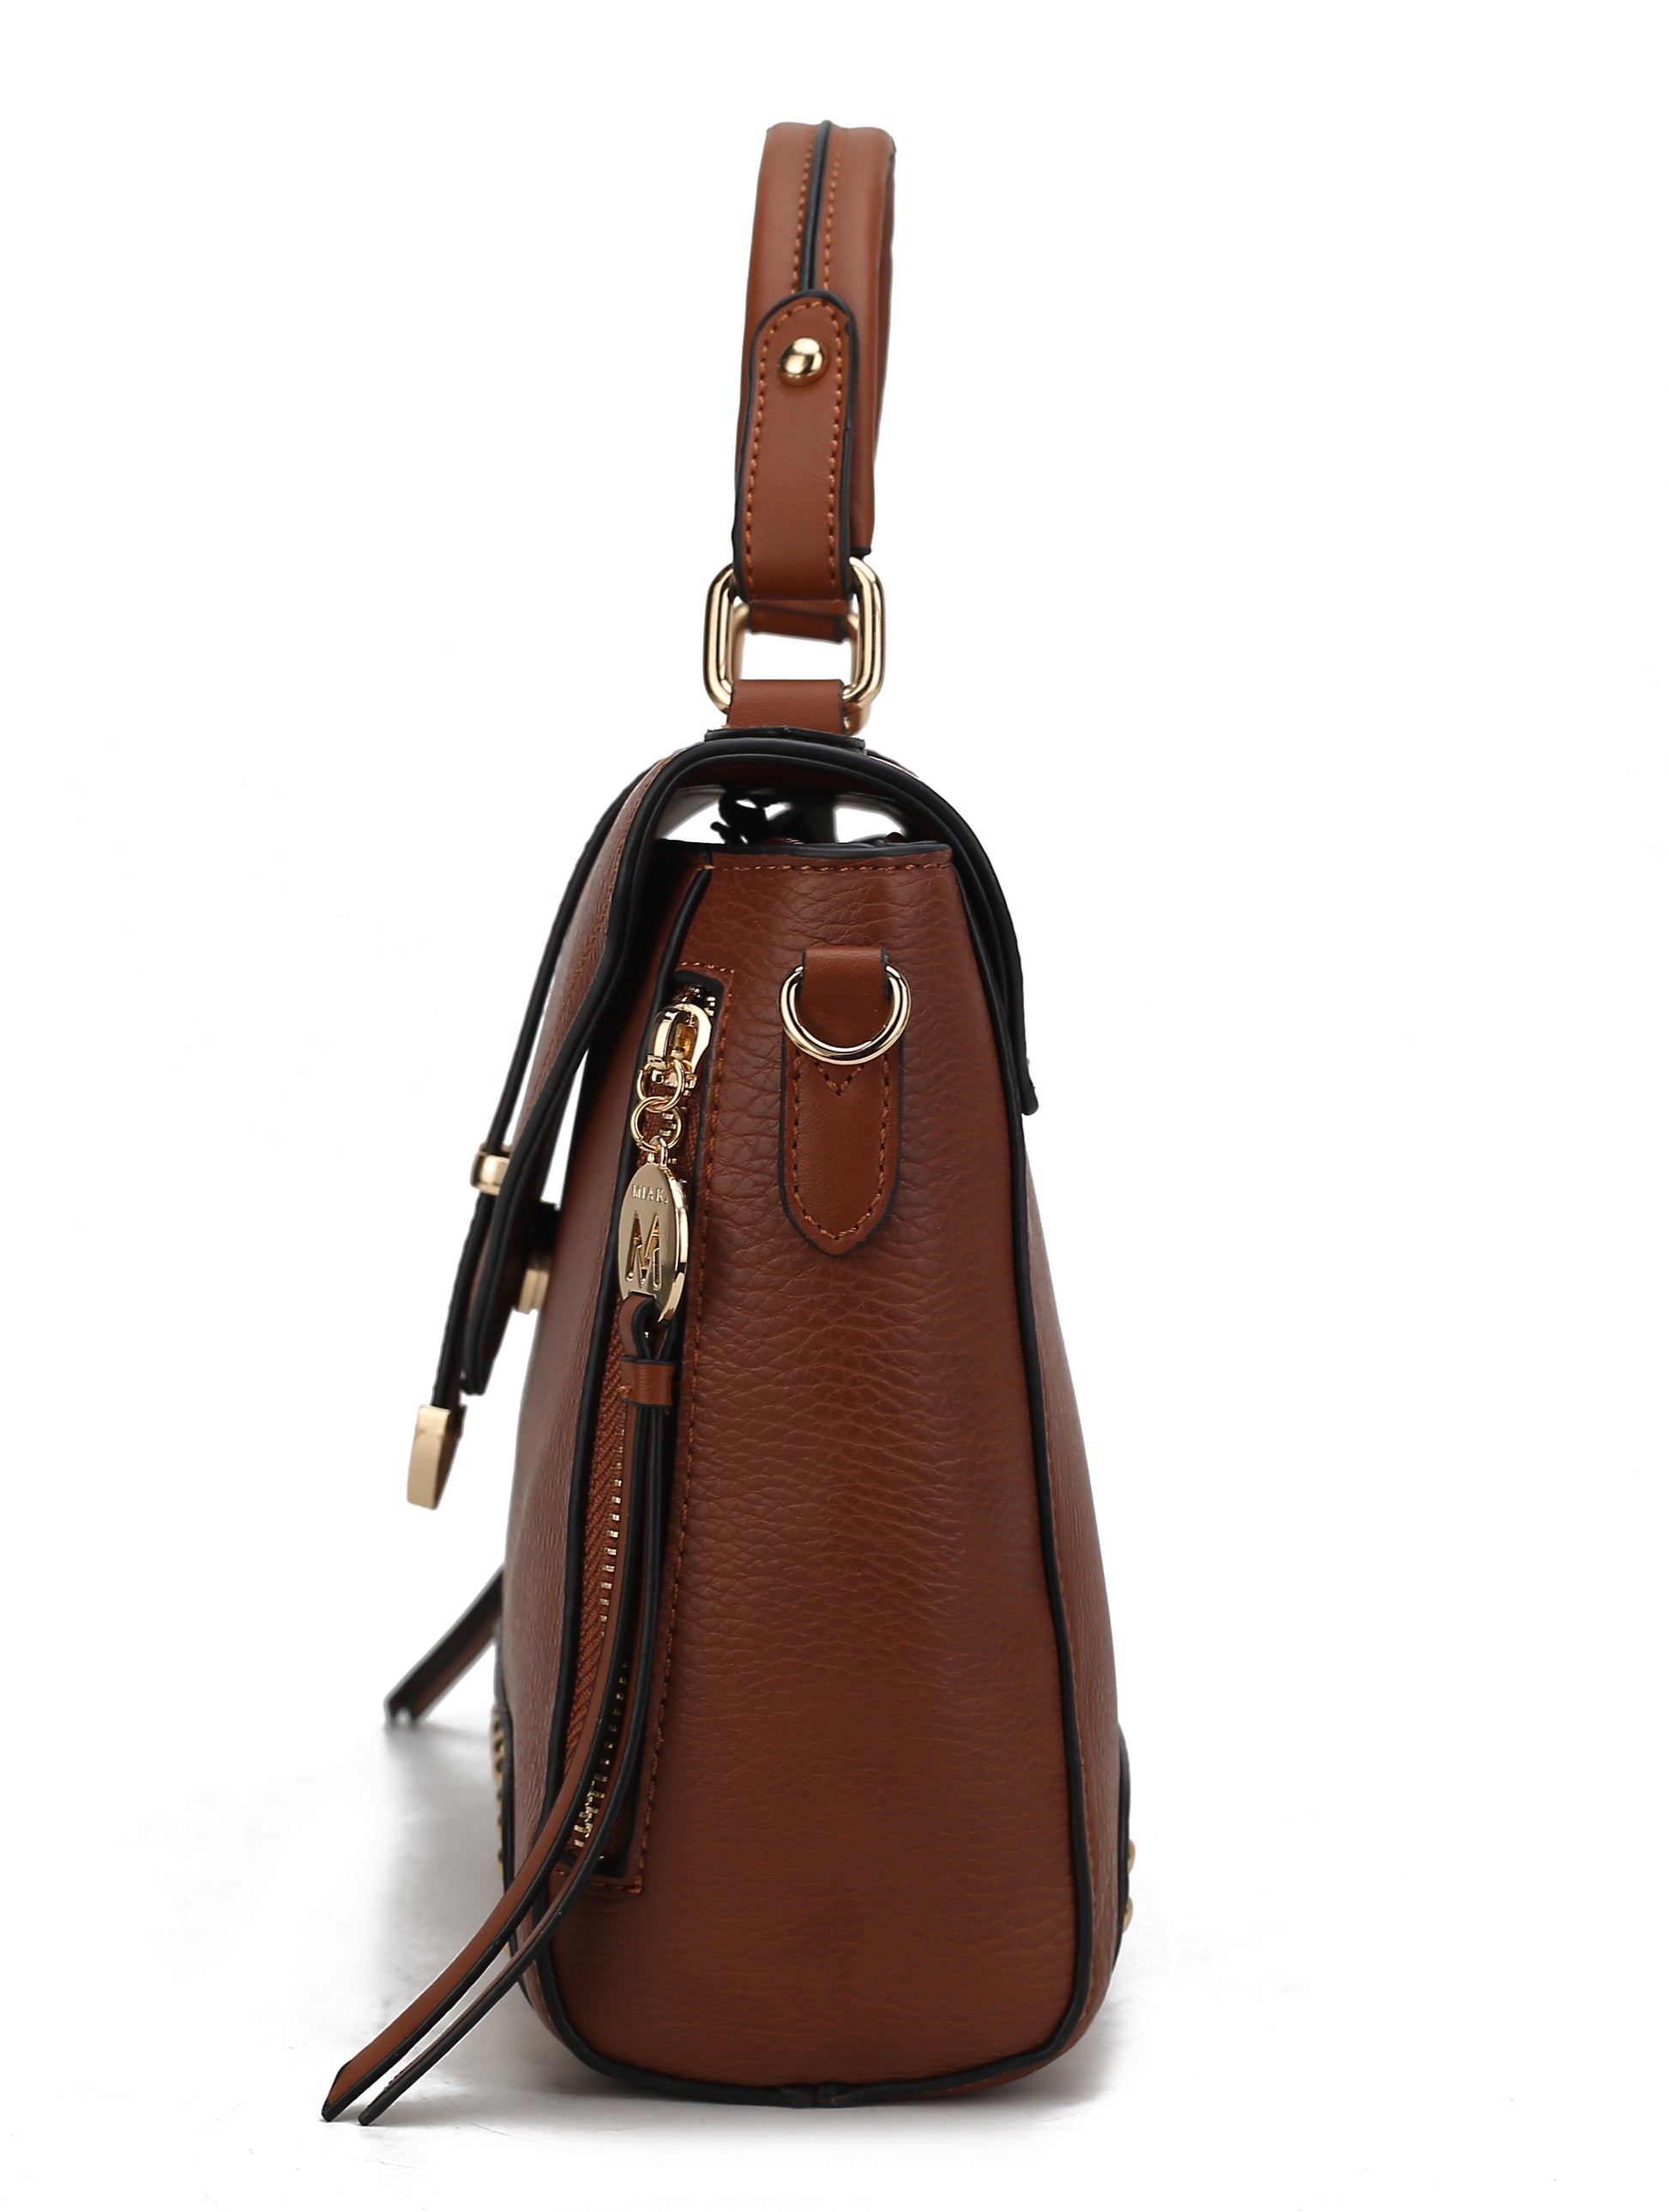 A tan Angela Vegan Leather Women’s Satchel Bag by Pink Orpheus with a zipper closure.